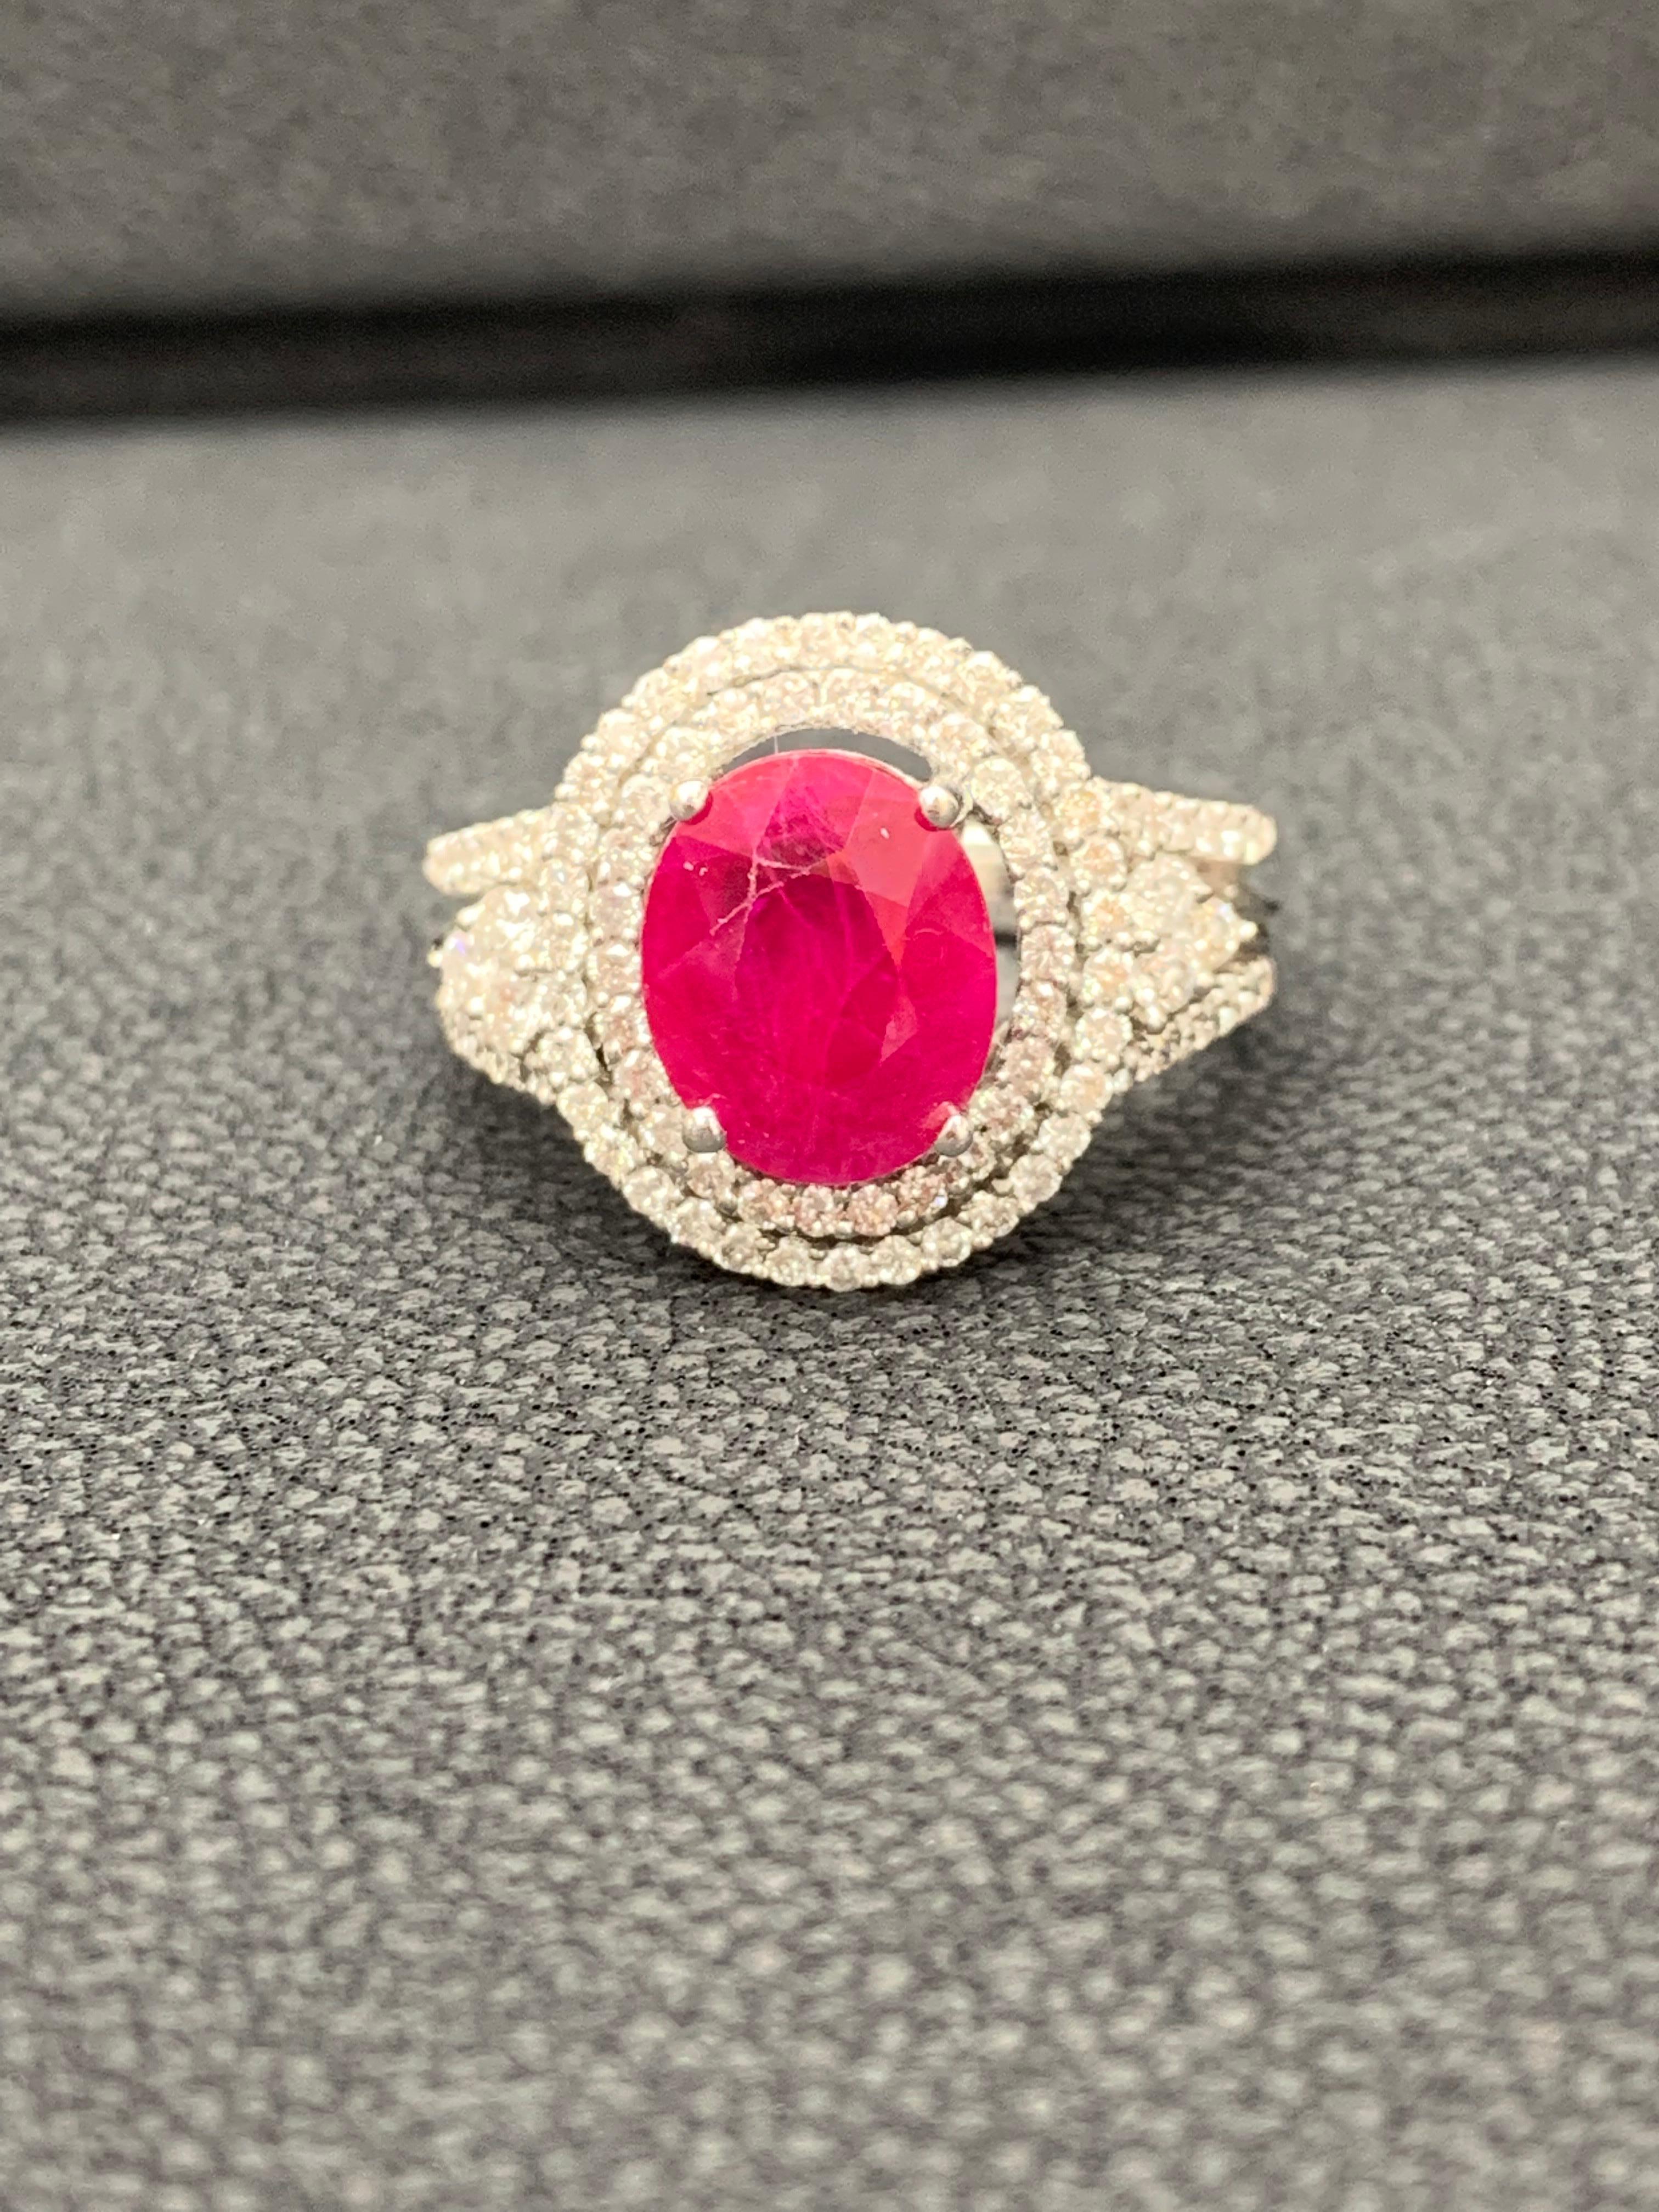 A color-rich engagement ring style showcasing a 2.82 carat oval cut red ruby, accented by a double row of round brilliant diamonds set in a 18k white gold setting. 90 Diamonds weigh 0.73 carats total.

Size 6.5 US (Sizable). One of a Kind 